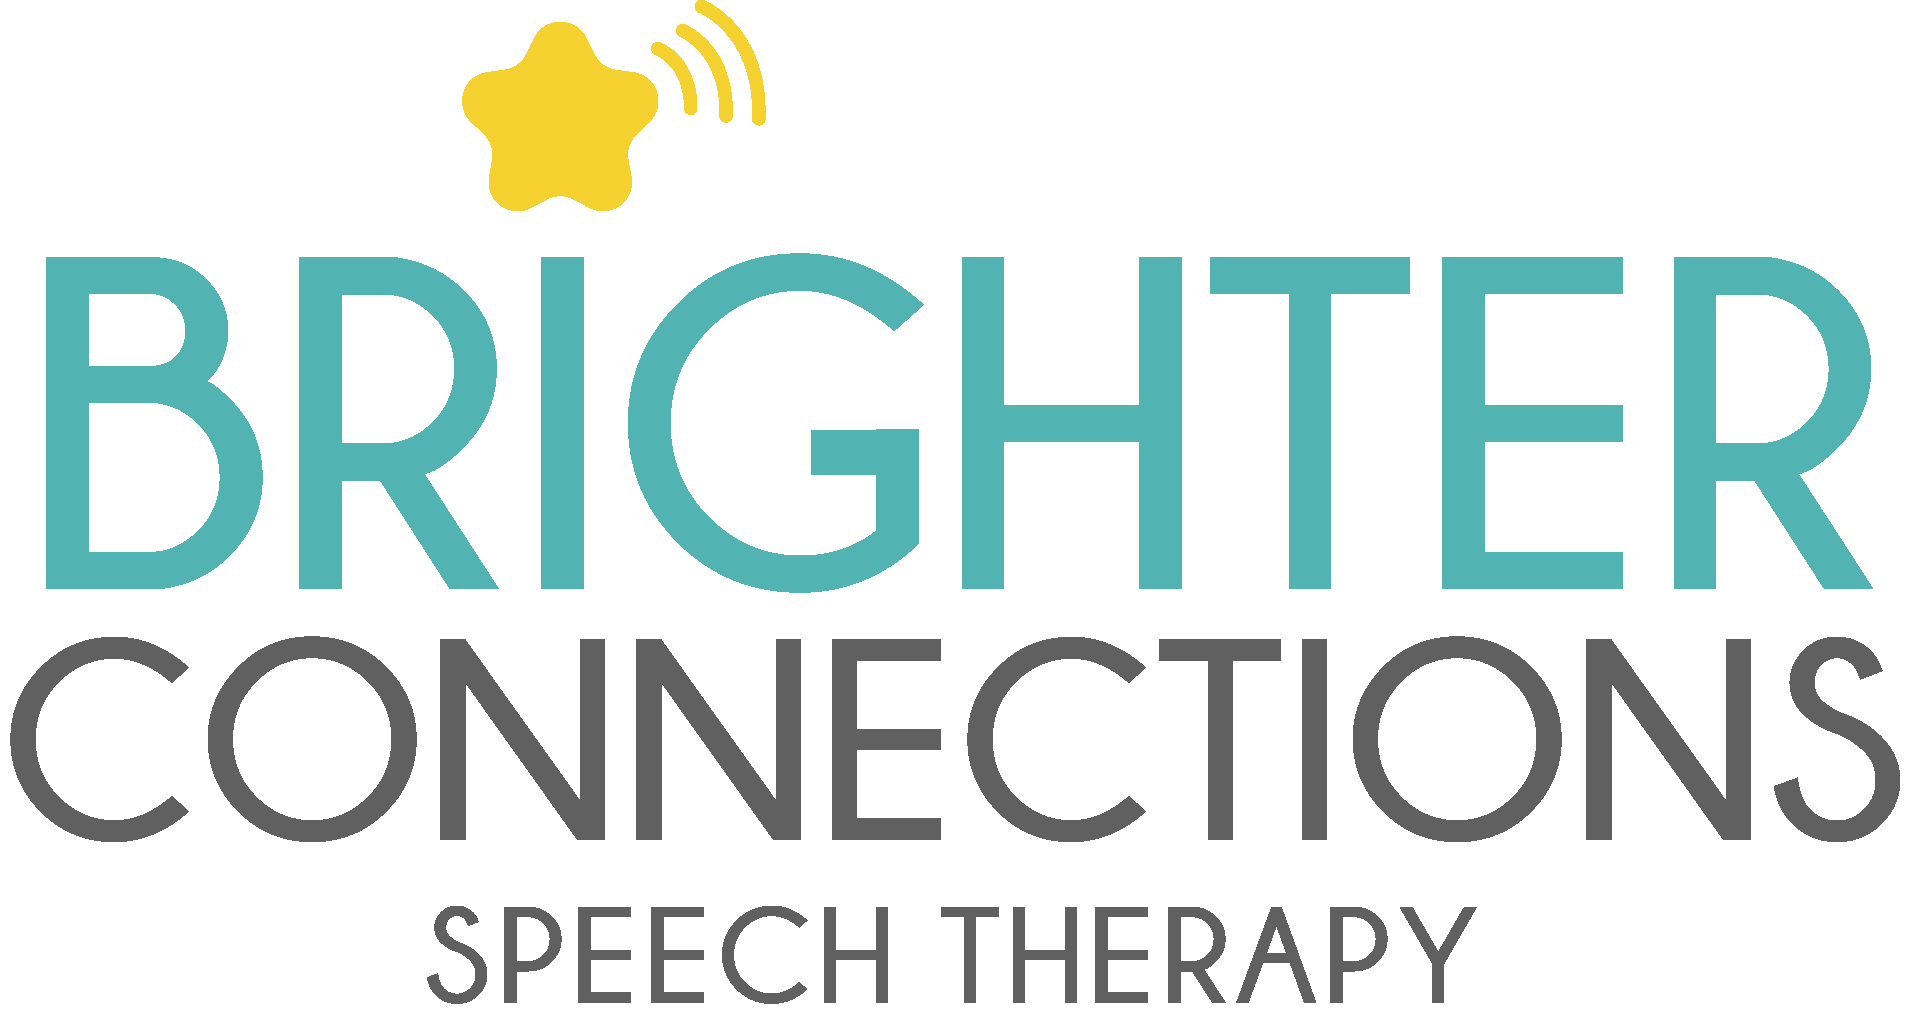 Brighter Connections Speech Therapy logo